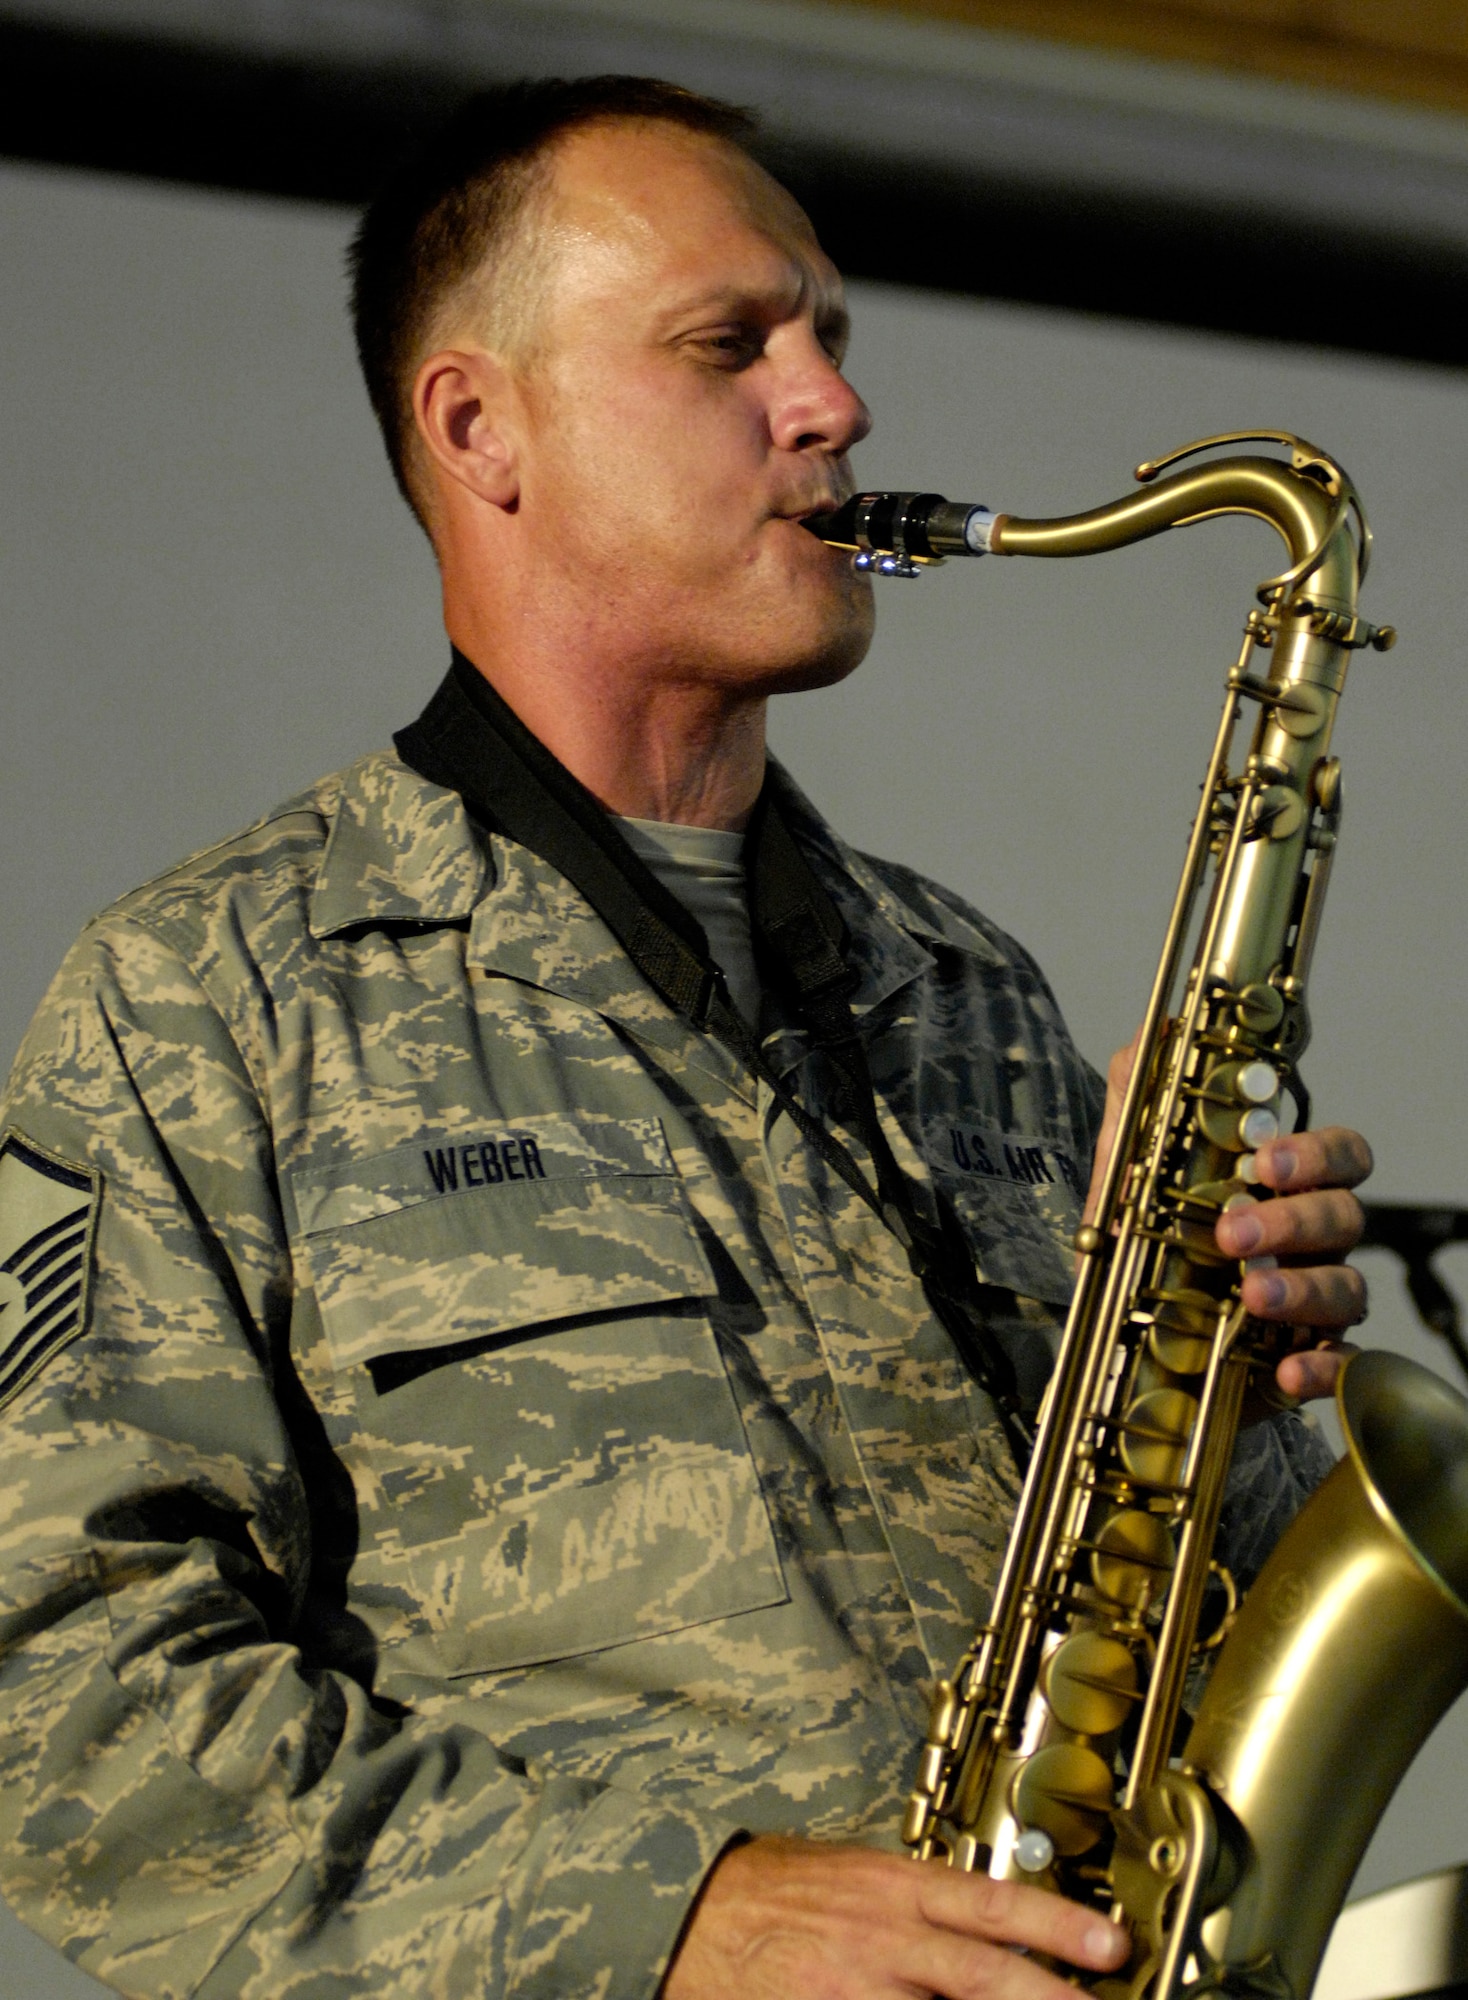 BAGRAM AIR FIELD, Afghanistan – Master Sgt. Daniel Weber, U.S. Air Forces Band ‘Falcon’ saxophonist, delivers a crowd pleasing solo during a show here June 22.  ‘Falcon’ travels throughout the area of responsibility positively promoting troop morale, diplomacy and reach out to host nation communities.  (U.S. Air Force photo by Master Sgt. Demetrius Lester)